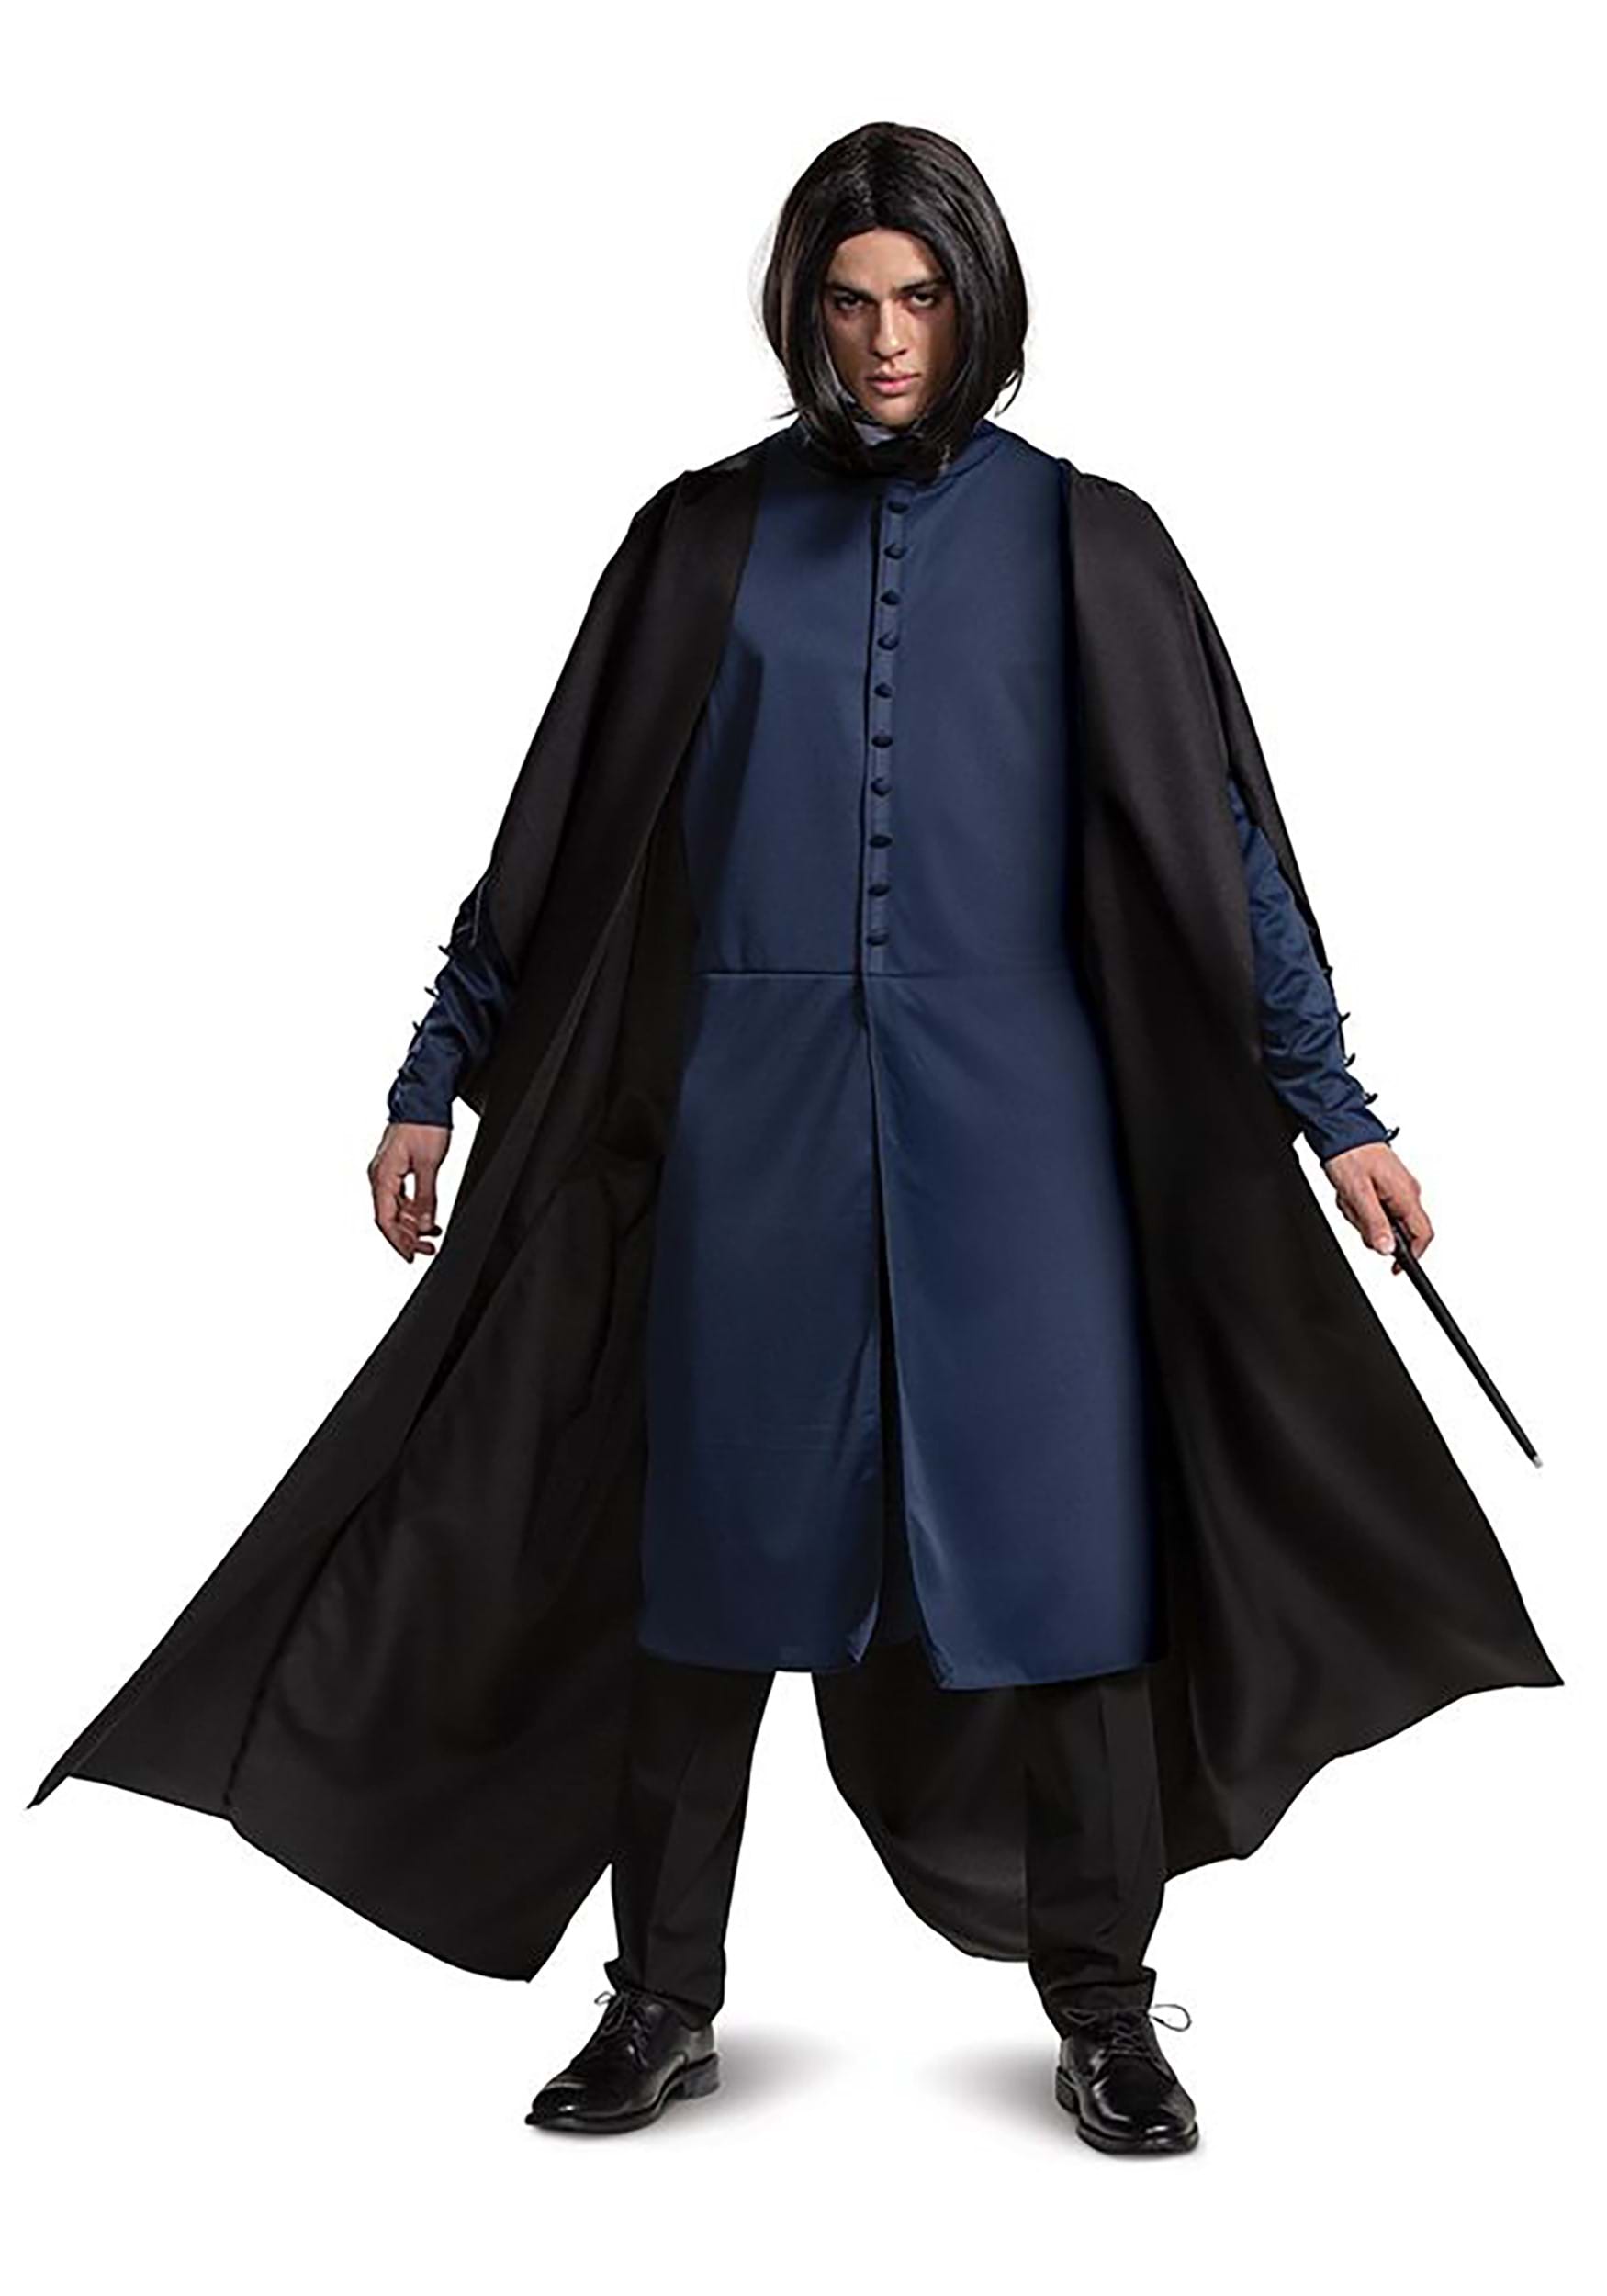 Image of Harry Potter Adult Severus Snape Deluxe Costume ID DI107709-XXL